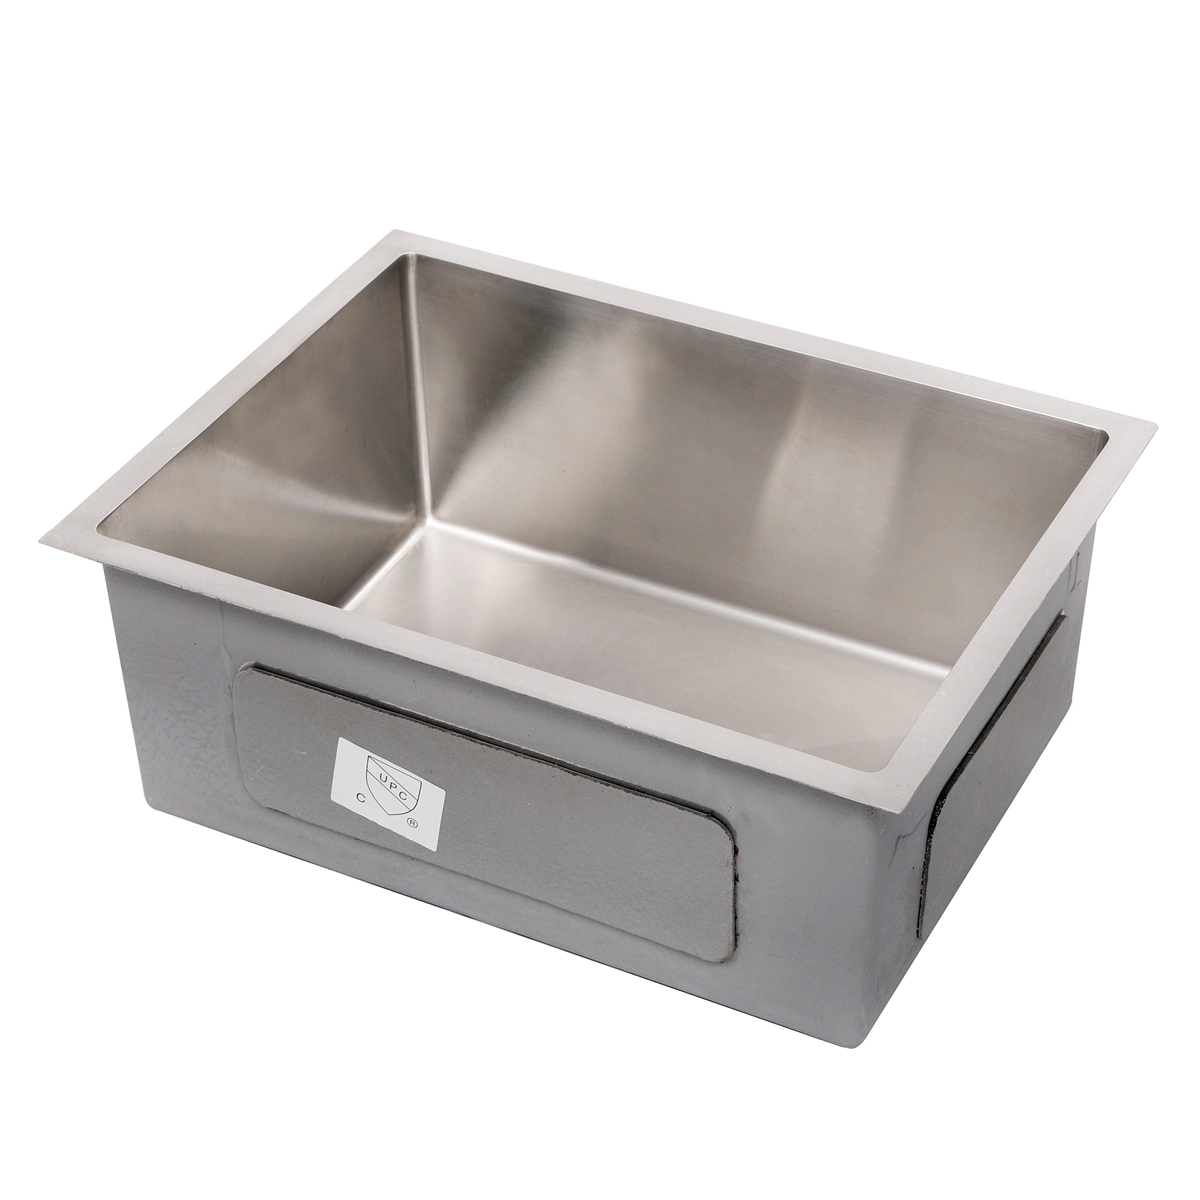 304 Square Hole Single Bowl Undermout Handmade Kitchen Stainless Steel Sink R10 Small Corner